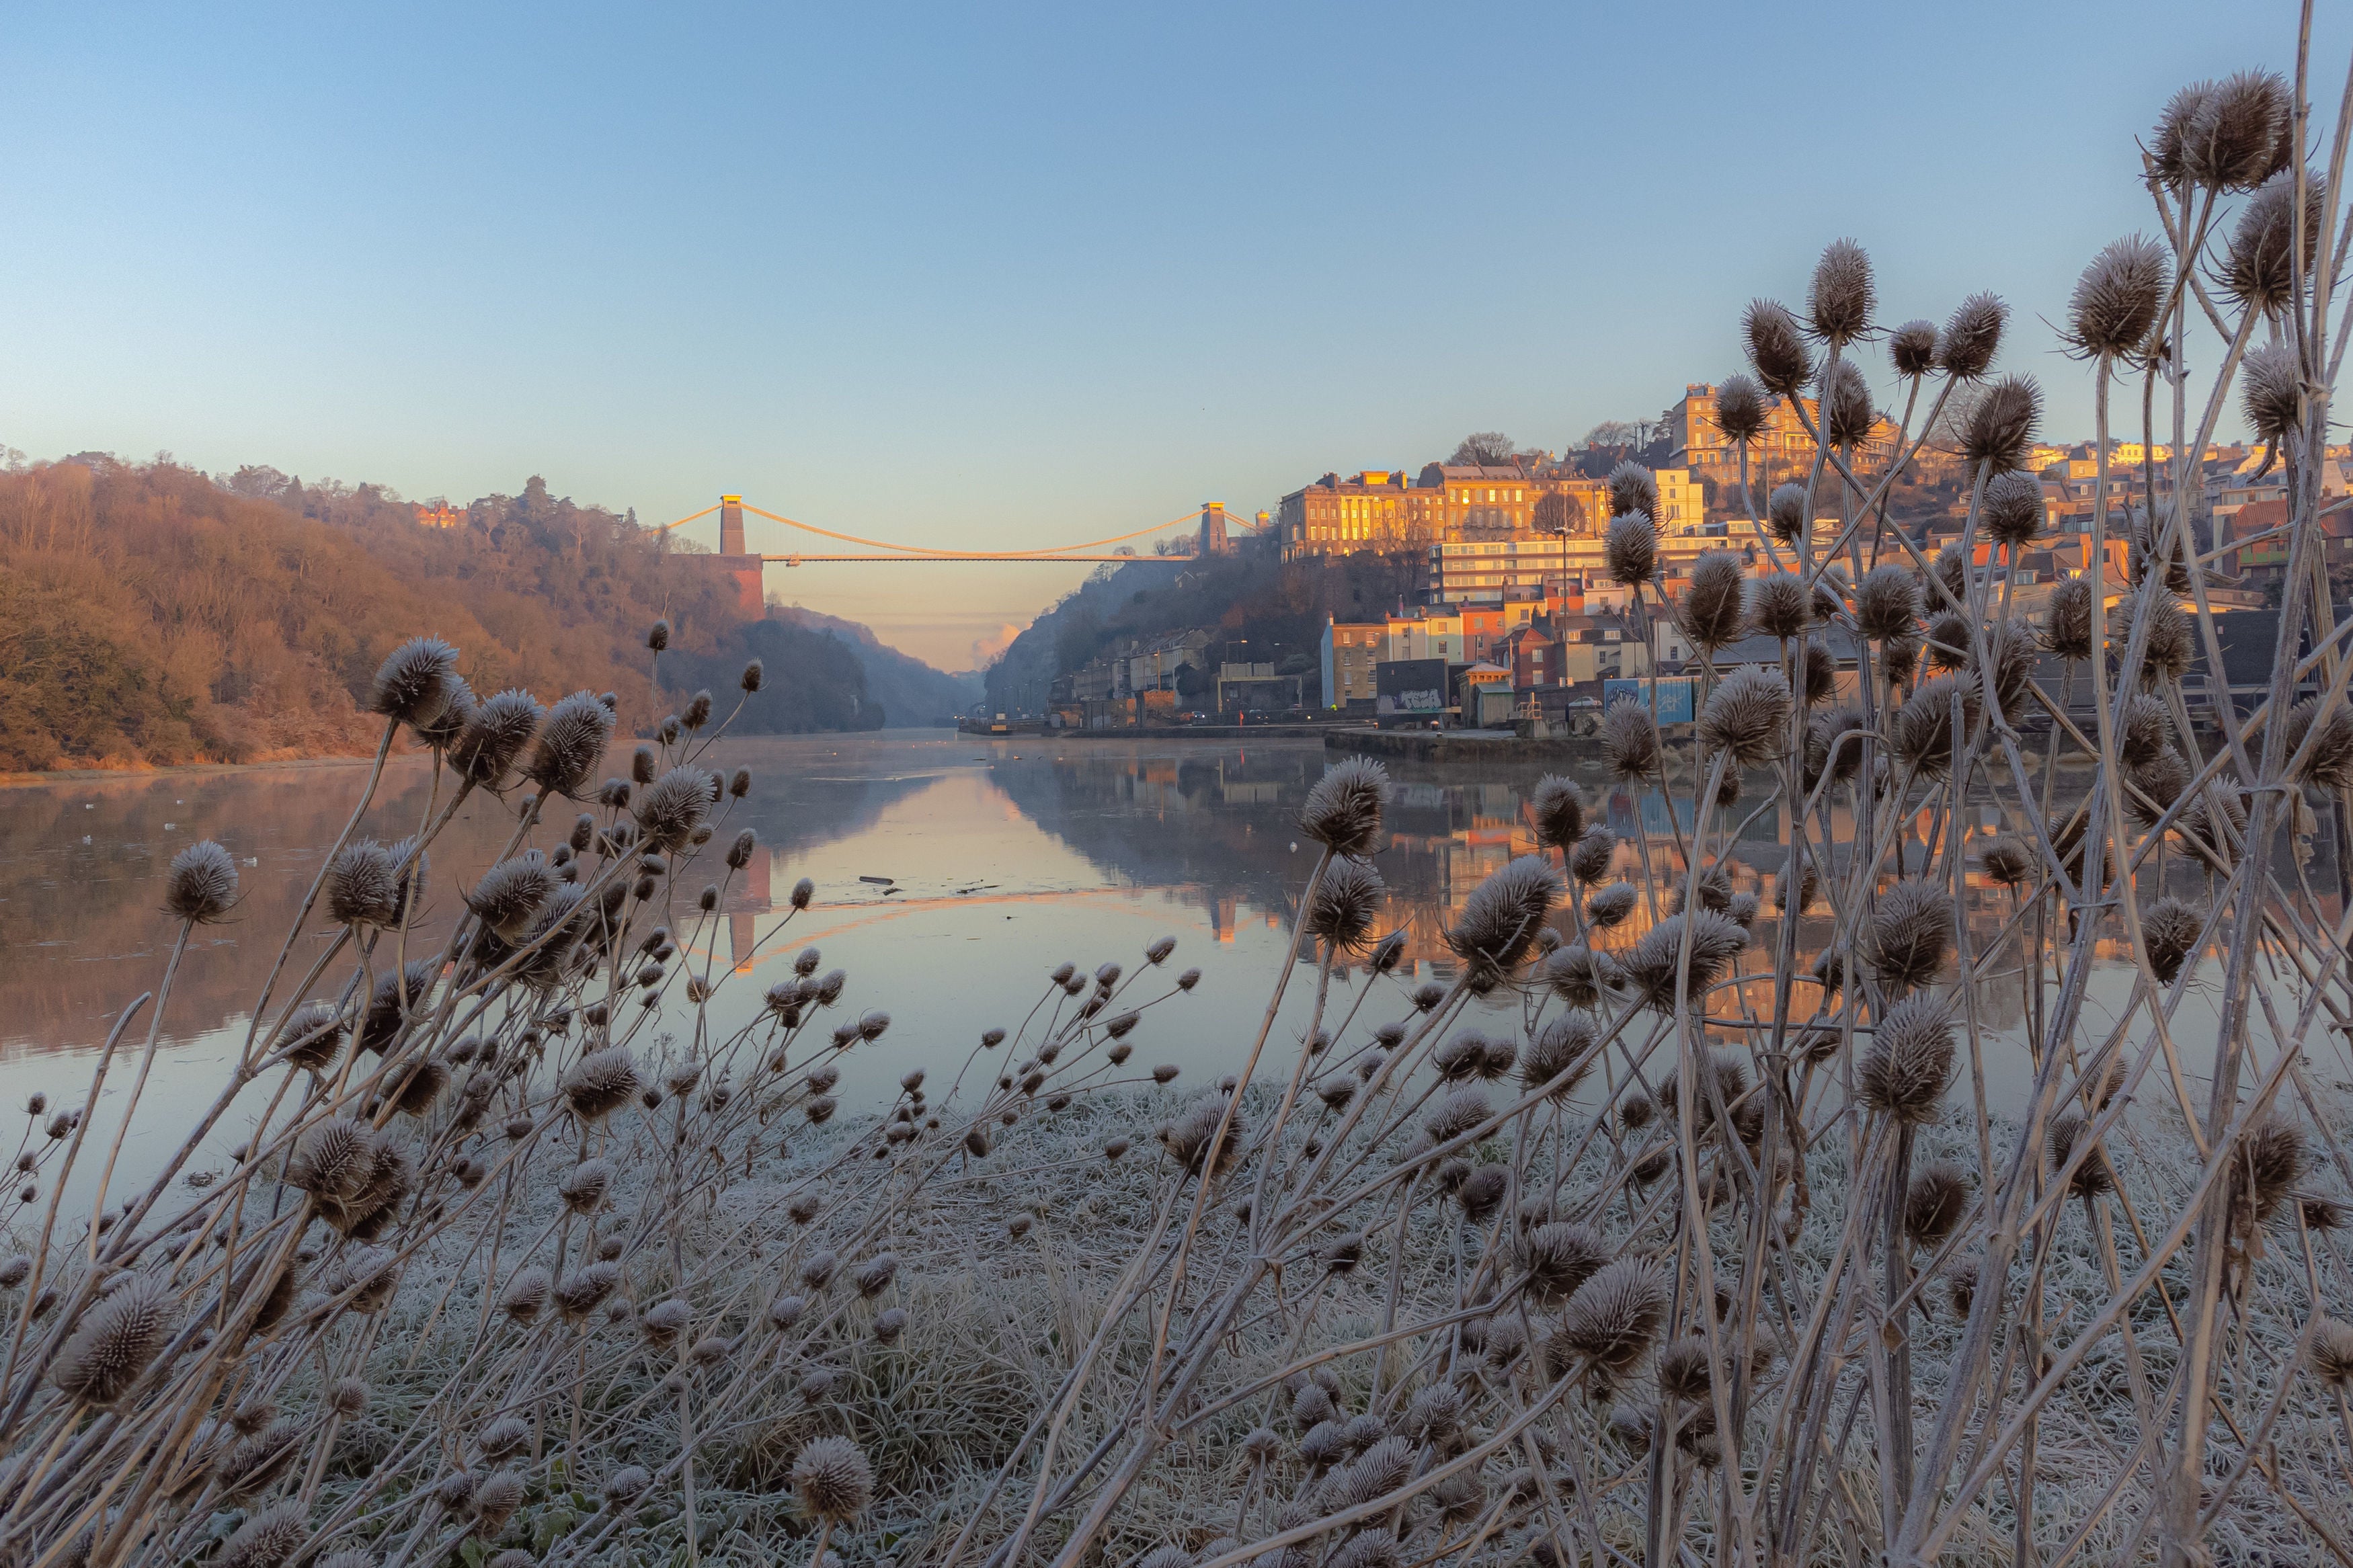 Frosty teasels in Bristol, where clear misty skies and a cold morning brings frost across parts of the south west UK